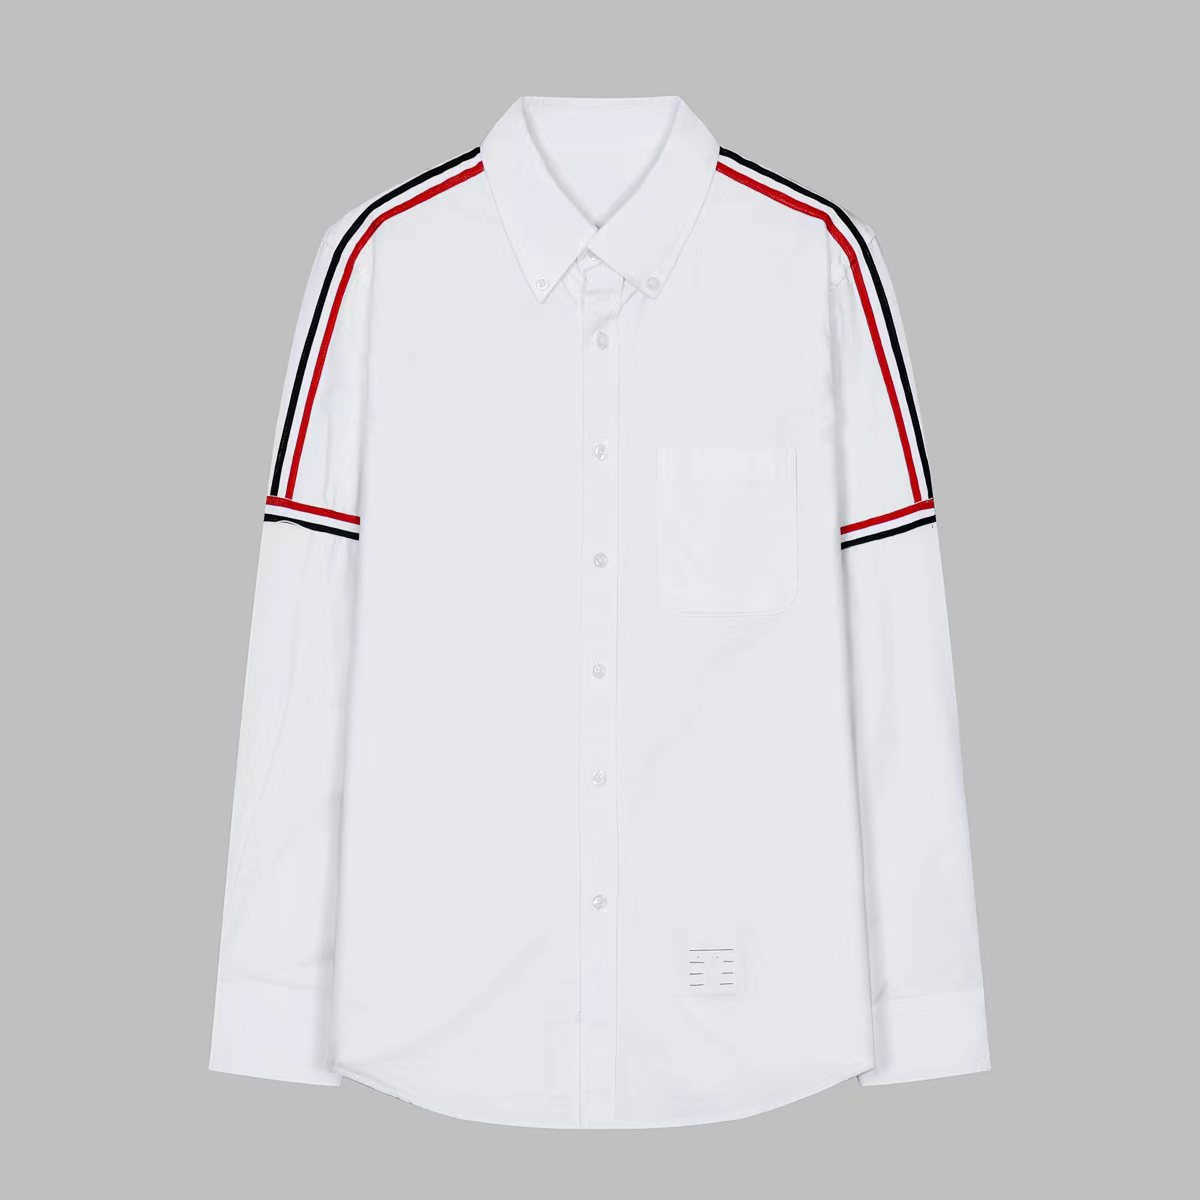 Luxury designer's new men's and women's short sleeved sportswear set Oxford Textile Casual Long Sleeve Double Shoulder Color Ribbon White Shirt Unisex